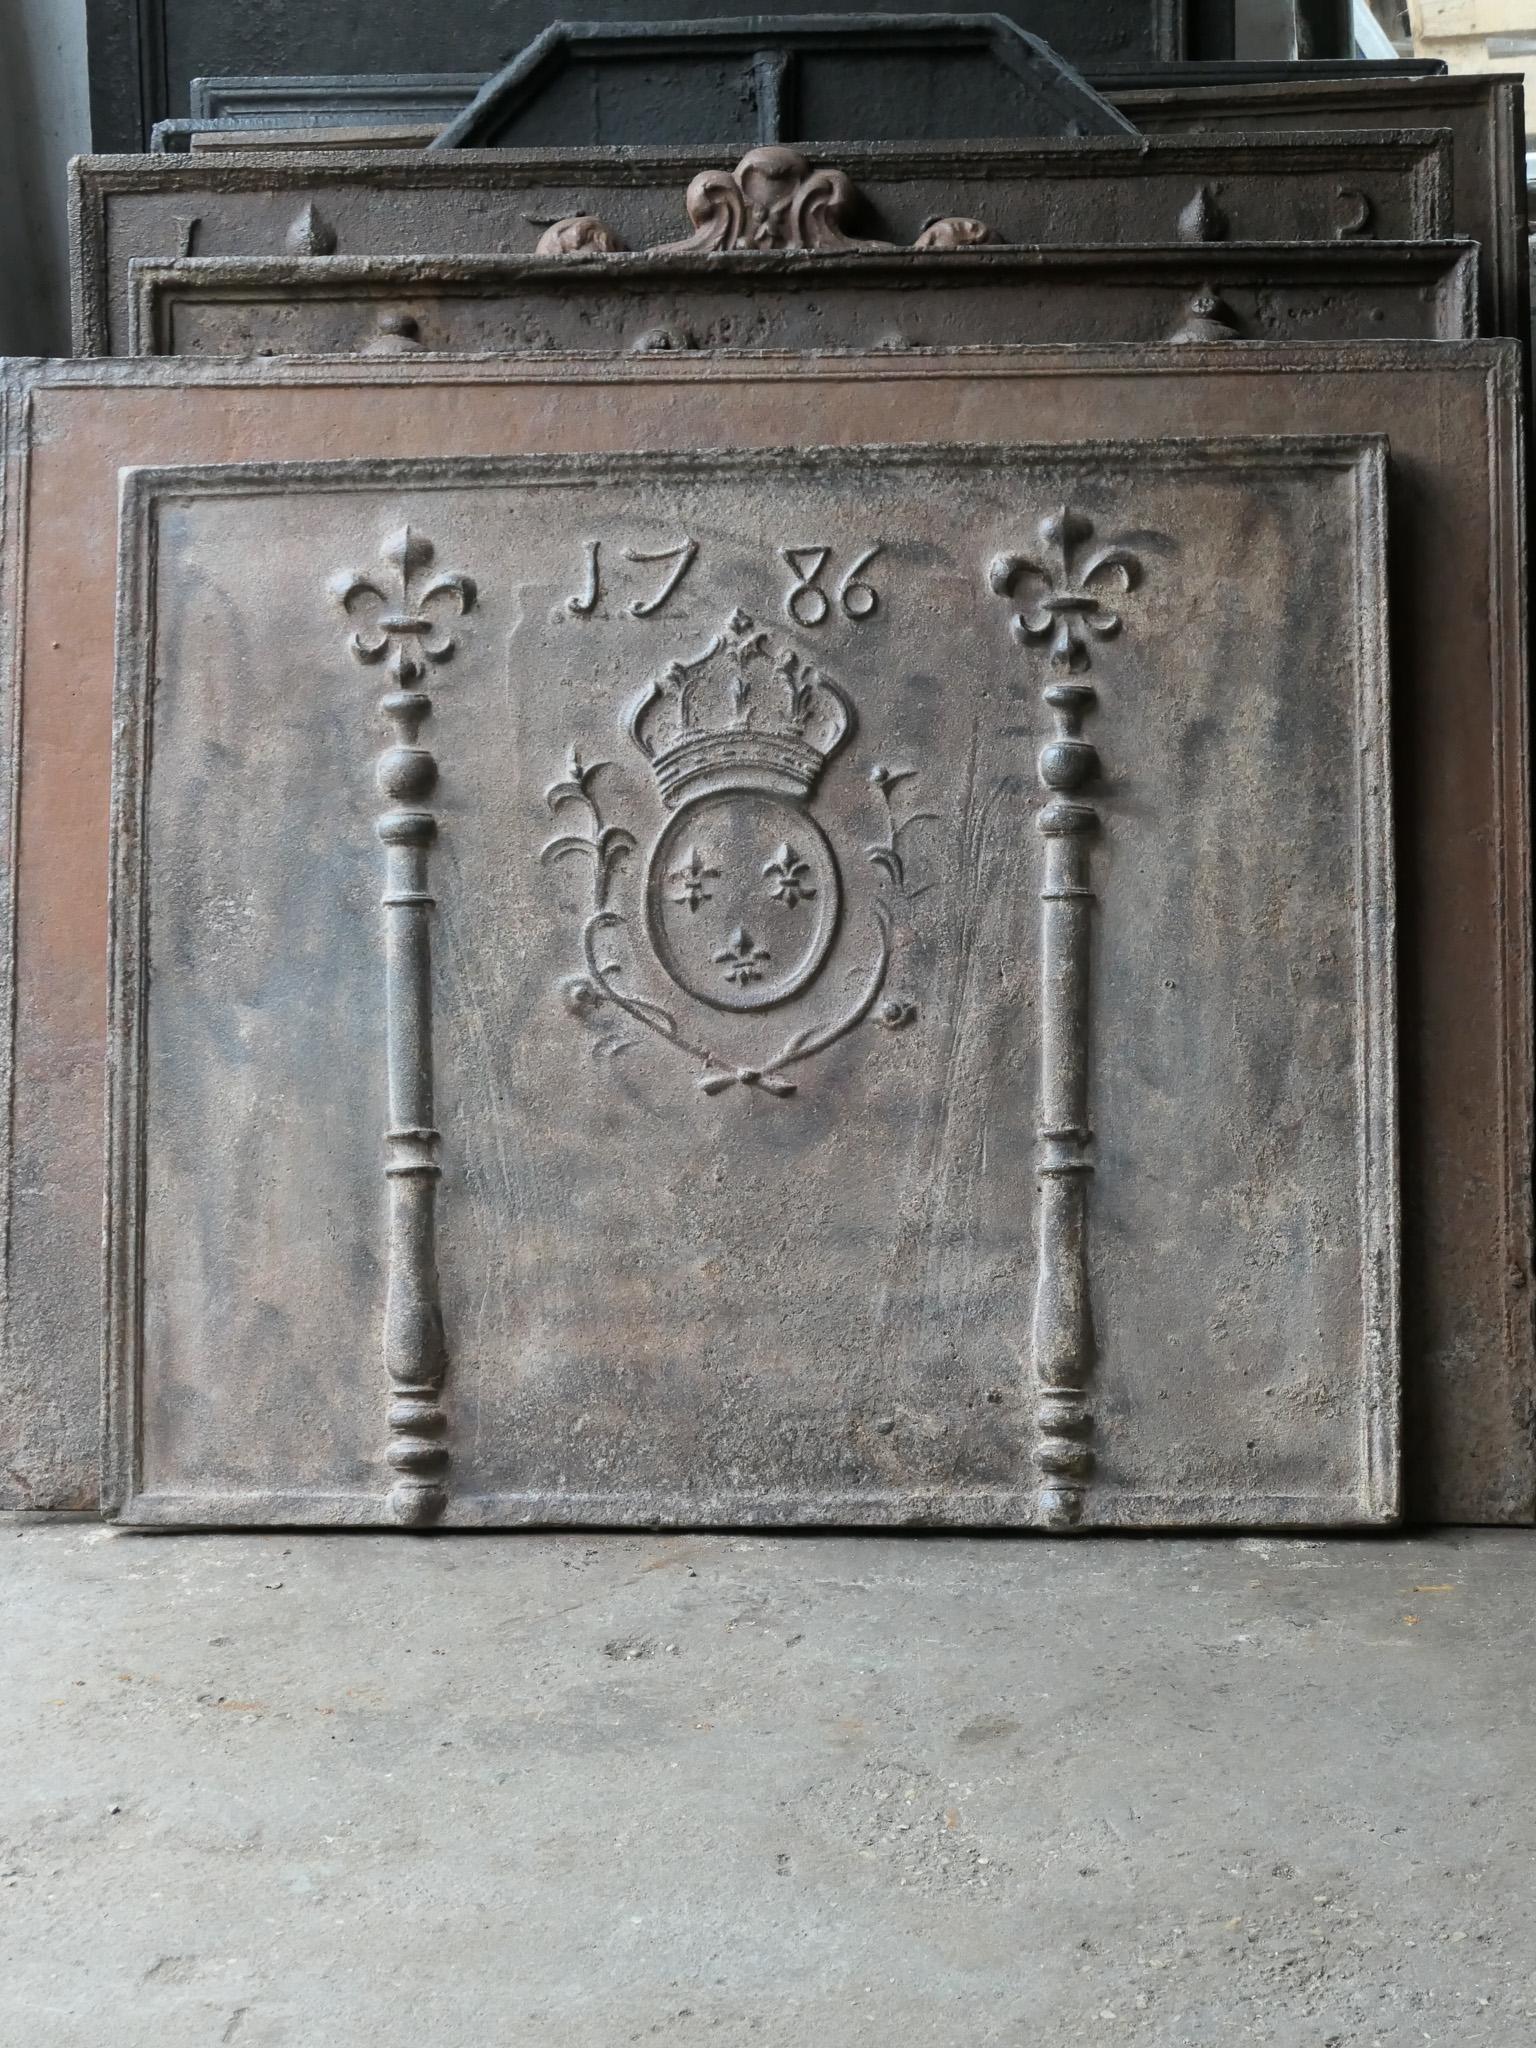 18th century French Louis XV fireback with the arms of France. This is the coat of arms of the House of Bourbon, an originally French royal house that became a major dynasty in Europe. It delivered kings for Spain (Navarra), France, both Sicilies